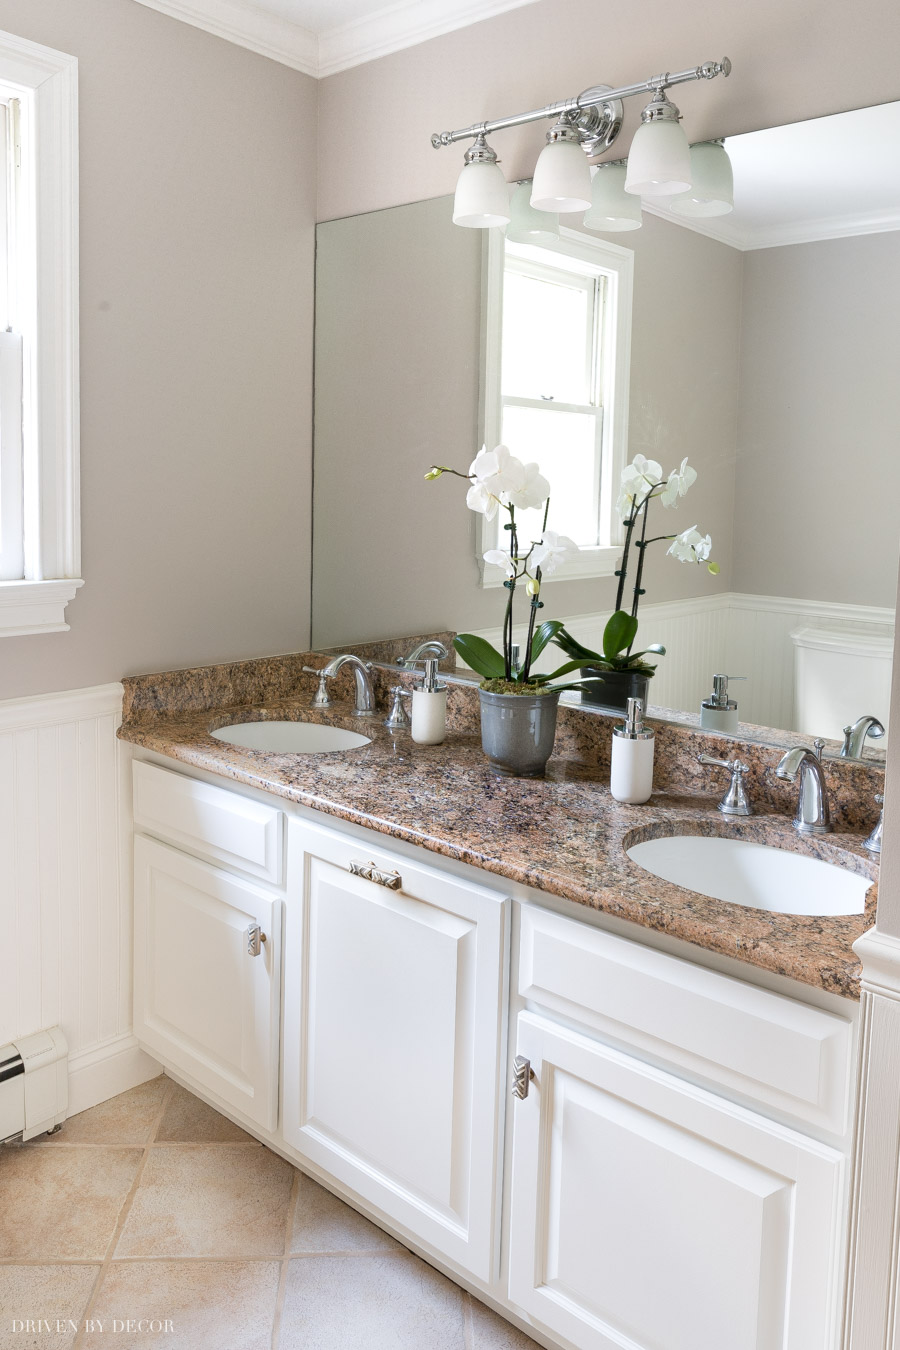 Painting our bathroom vanity made SUCH a difference! Come see the before and after!